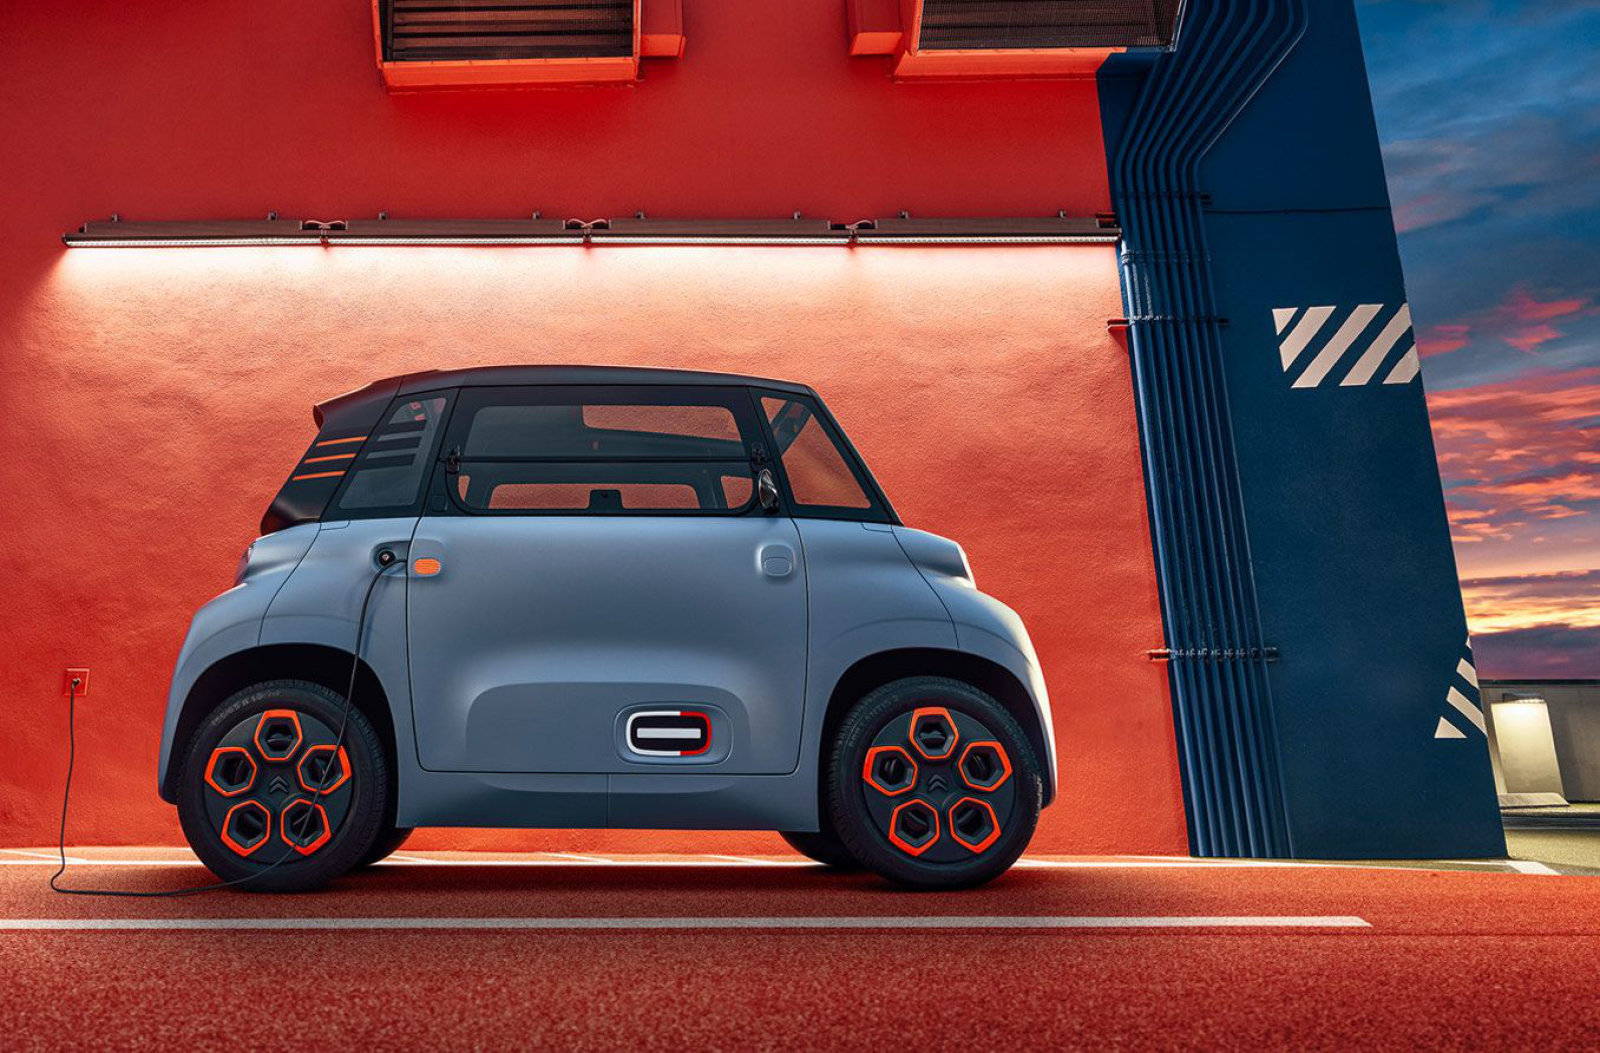 Citroën's new EV is a tiny two-seater that only costs $22 a month